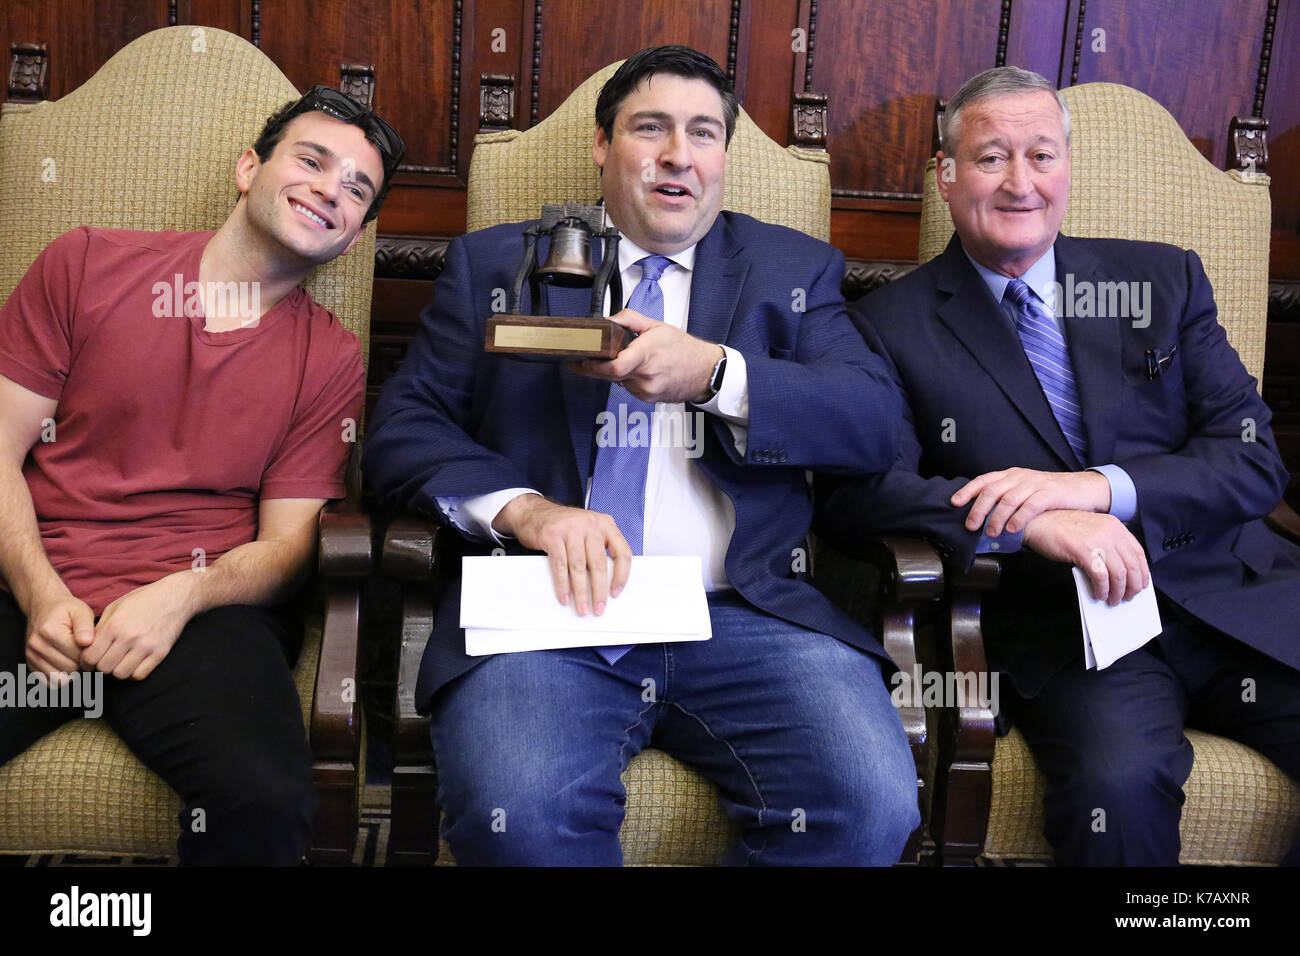 Pjiladelphia, PA, USA. 15th Sep, 2017. Actor Troy Gentile, who plays Barry Goldberg and producer Adam F Goldberg receive Liberty Bell from Philadelphia Mayor Jim Kenney for the Goldbergs in City Hall in Philadelphia, Pa on September 15, 2017 Credit: Star Shooter/Media Punch/Alamy Live News Stock Photo